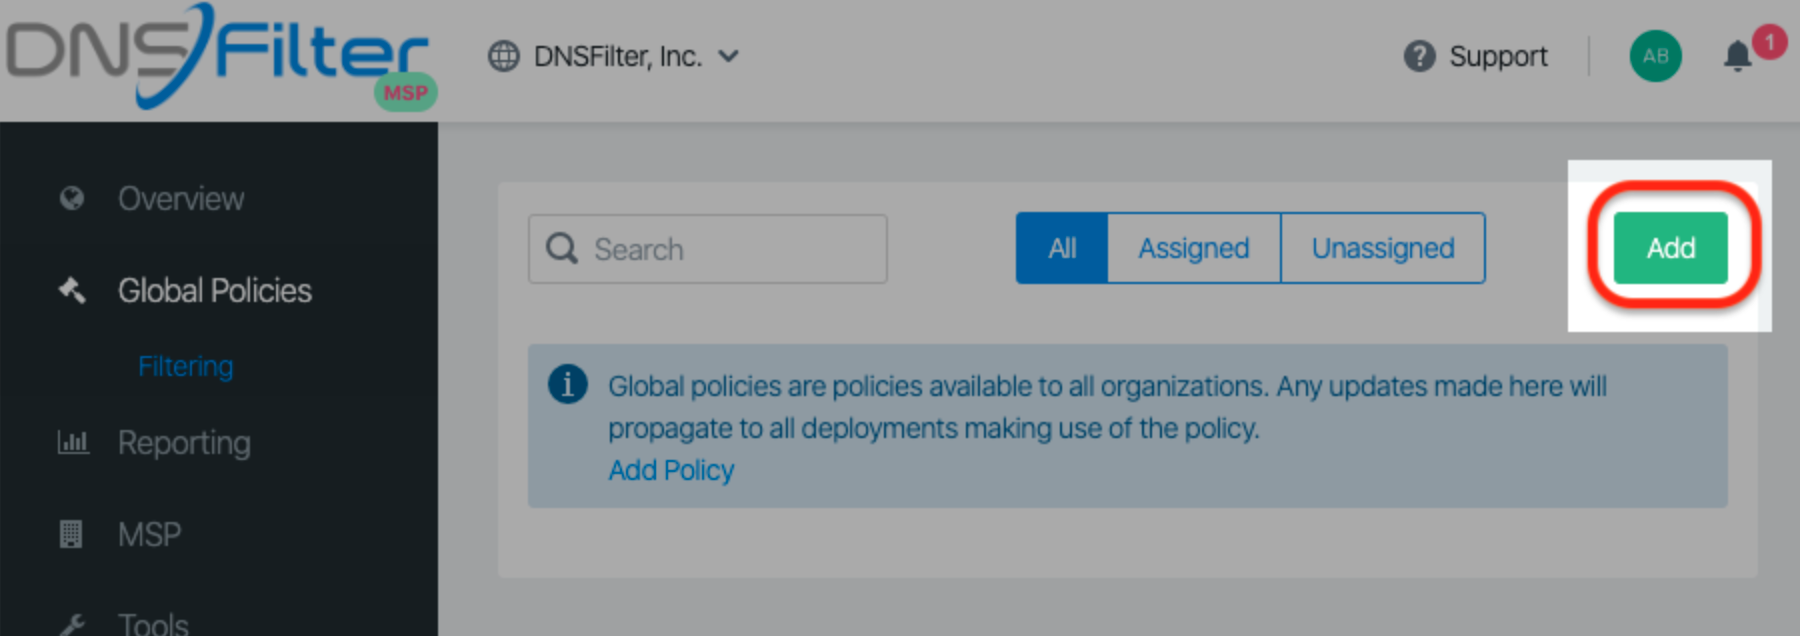 f4b1886-Global-Policies_Filtering_Add.png__903_323__2021-05-19_16-38-20.png